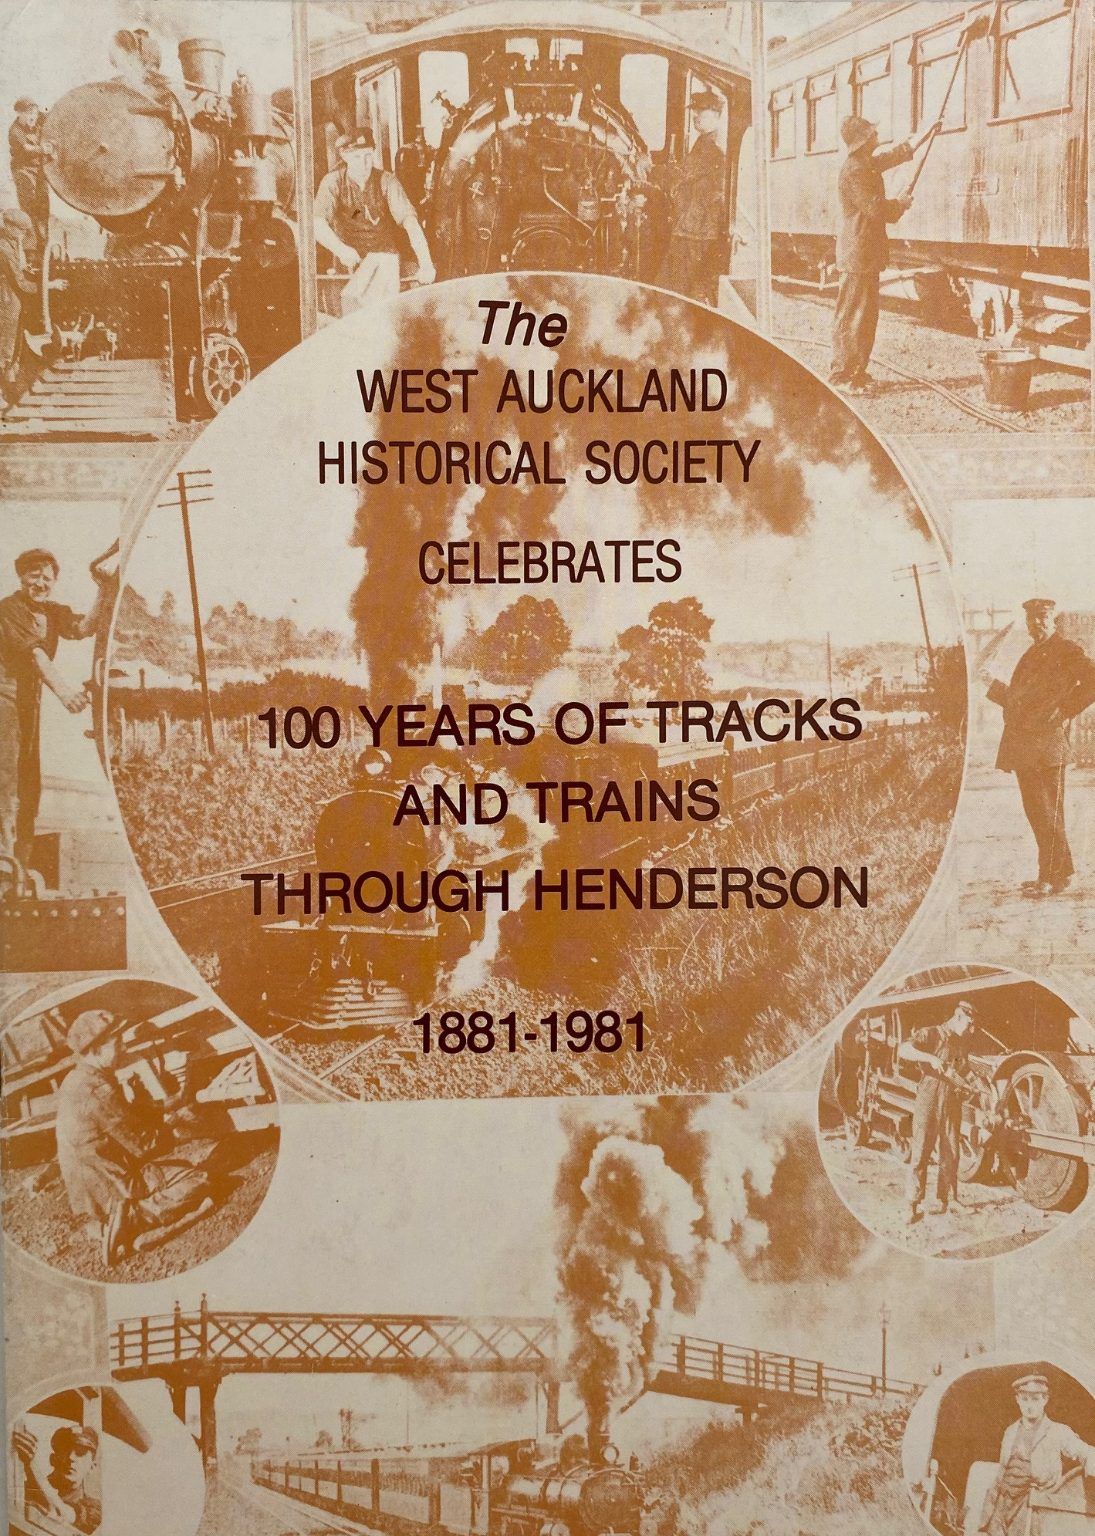 100 YEARS OF TRACKS AND TRAINS THROUGH HENDERSON 1881-1981